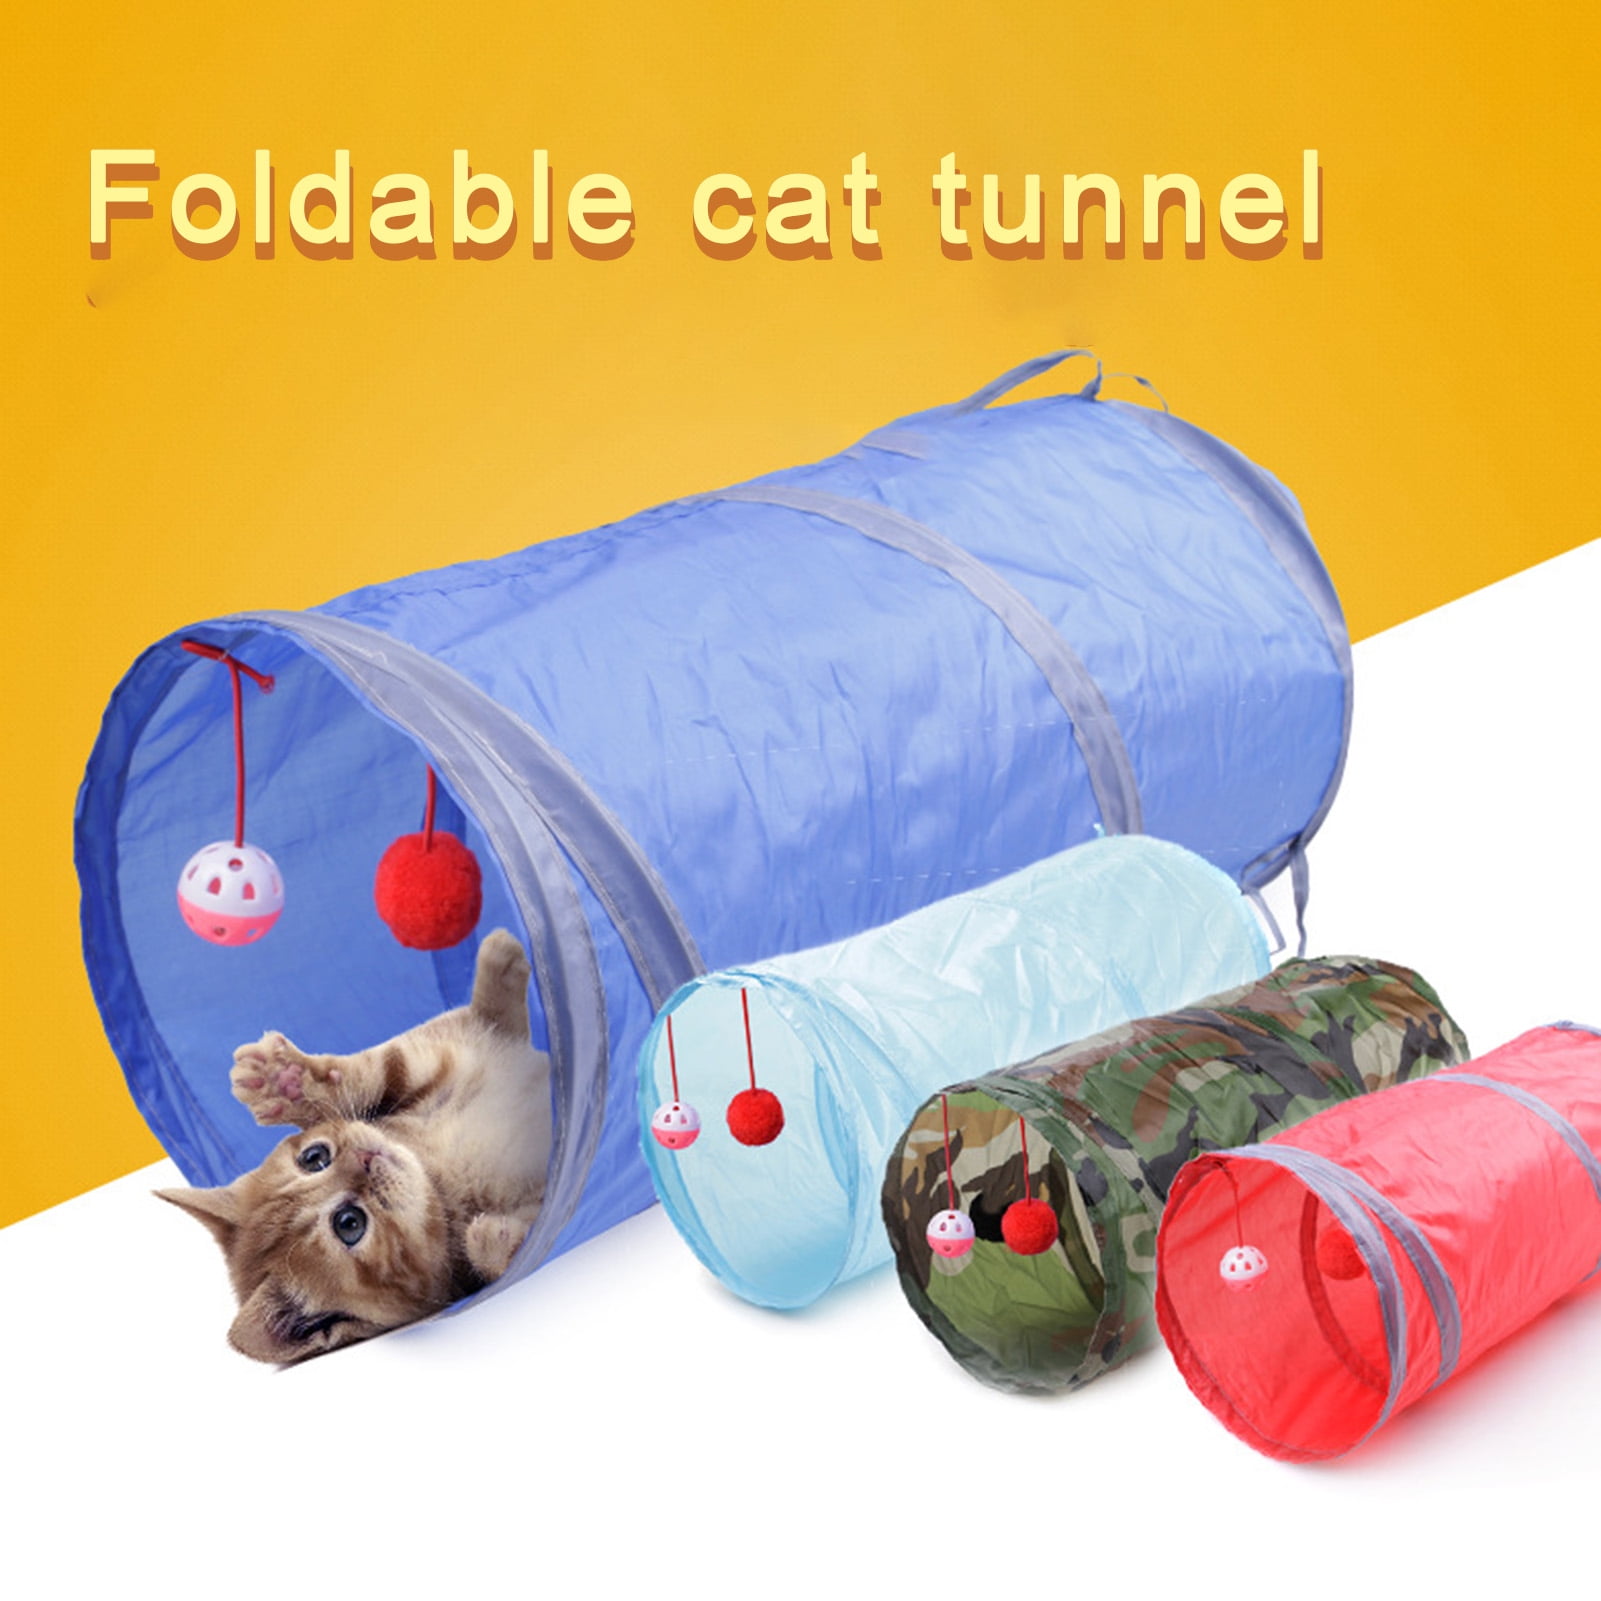 Maze Cat House Fun Cat Tunnel Foldable Kitten Playing Rainbow Tube Indoor Outdoor Kitty Puppy Toys for Puzzle Exercise Hiding Training-Cat Tunnel